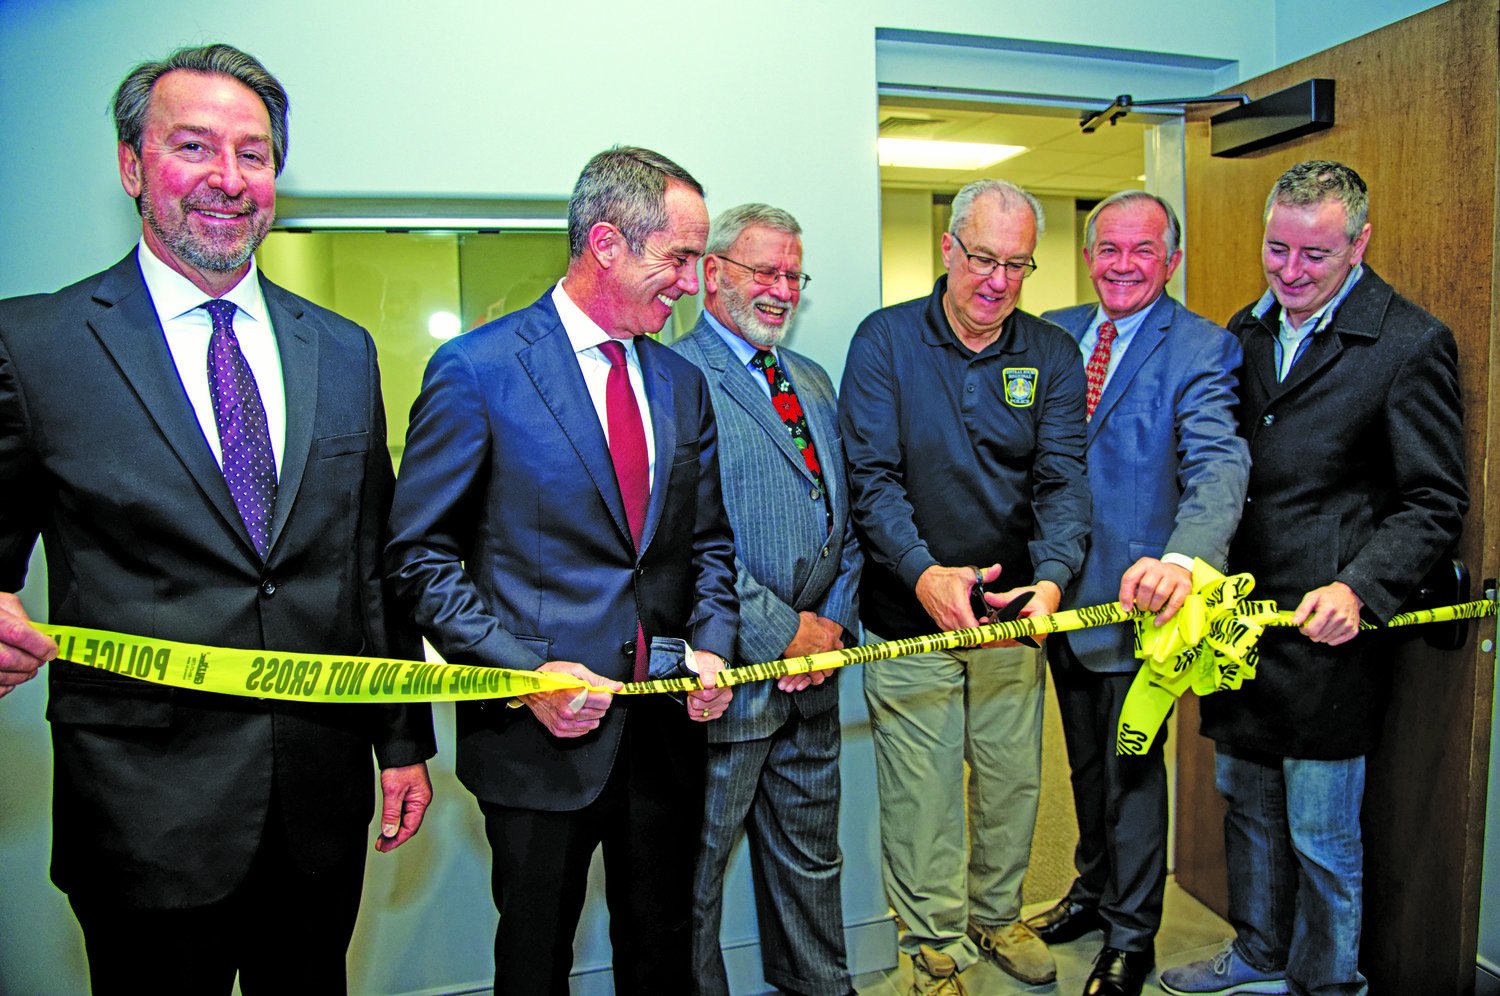 Officials gather as Chief Karl Knott cuts the ribbon to officially open the new Regional Police Headquarters in Doylestown. From left are Chalfont Mayor Brian Wallace, Sen. Steve Santarsiero, Mayor David Holewinski of New Britain Borough, Chief Knott, Doylestown Mayor Ron Strouse and Congressman Brian Fitzpatrick.